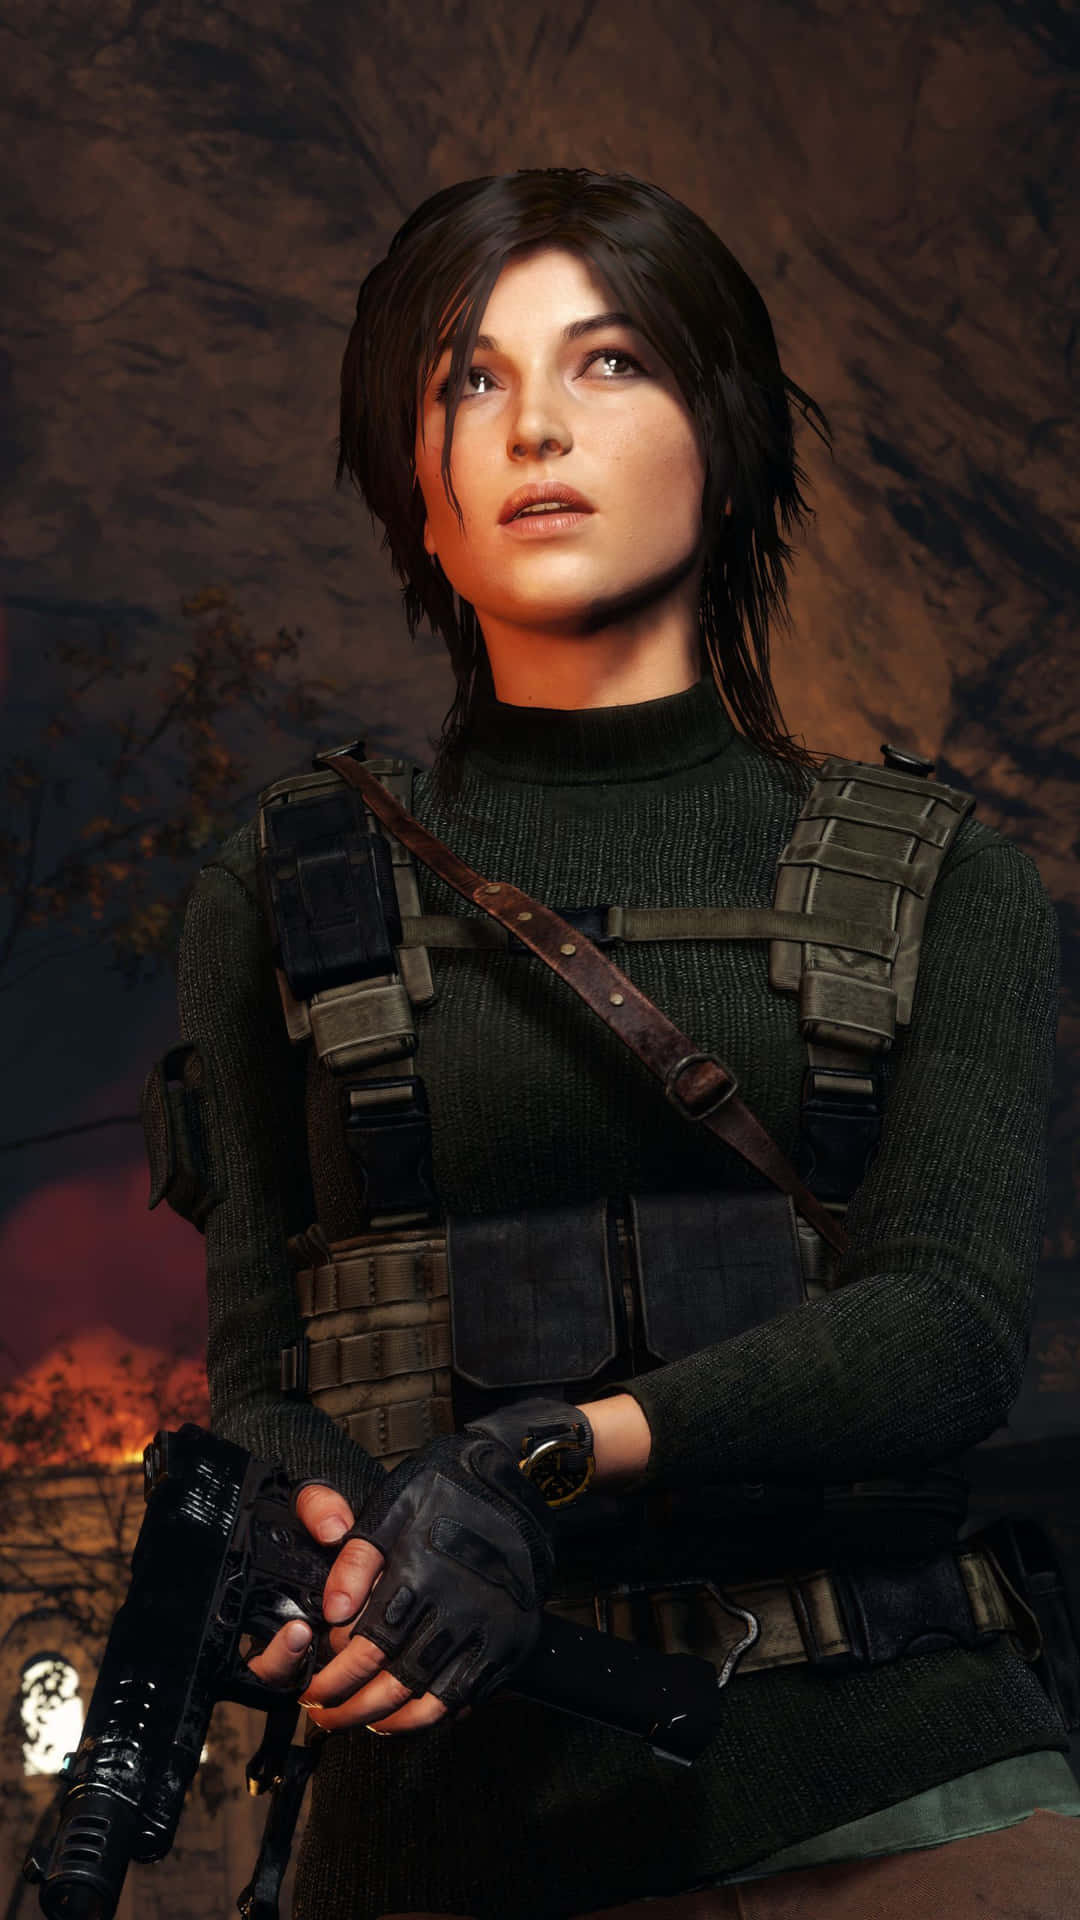 A Woman Holding A Gun In A Video Game